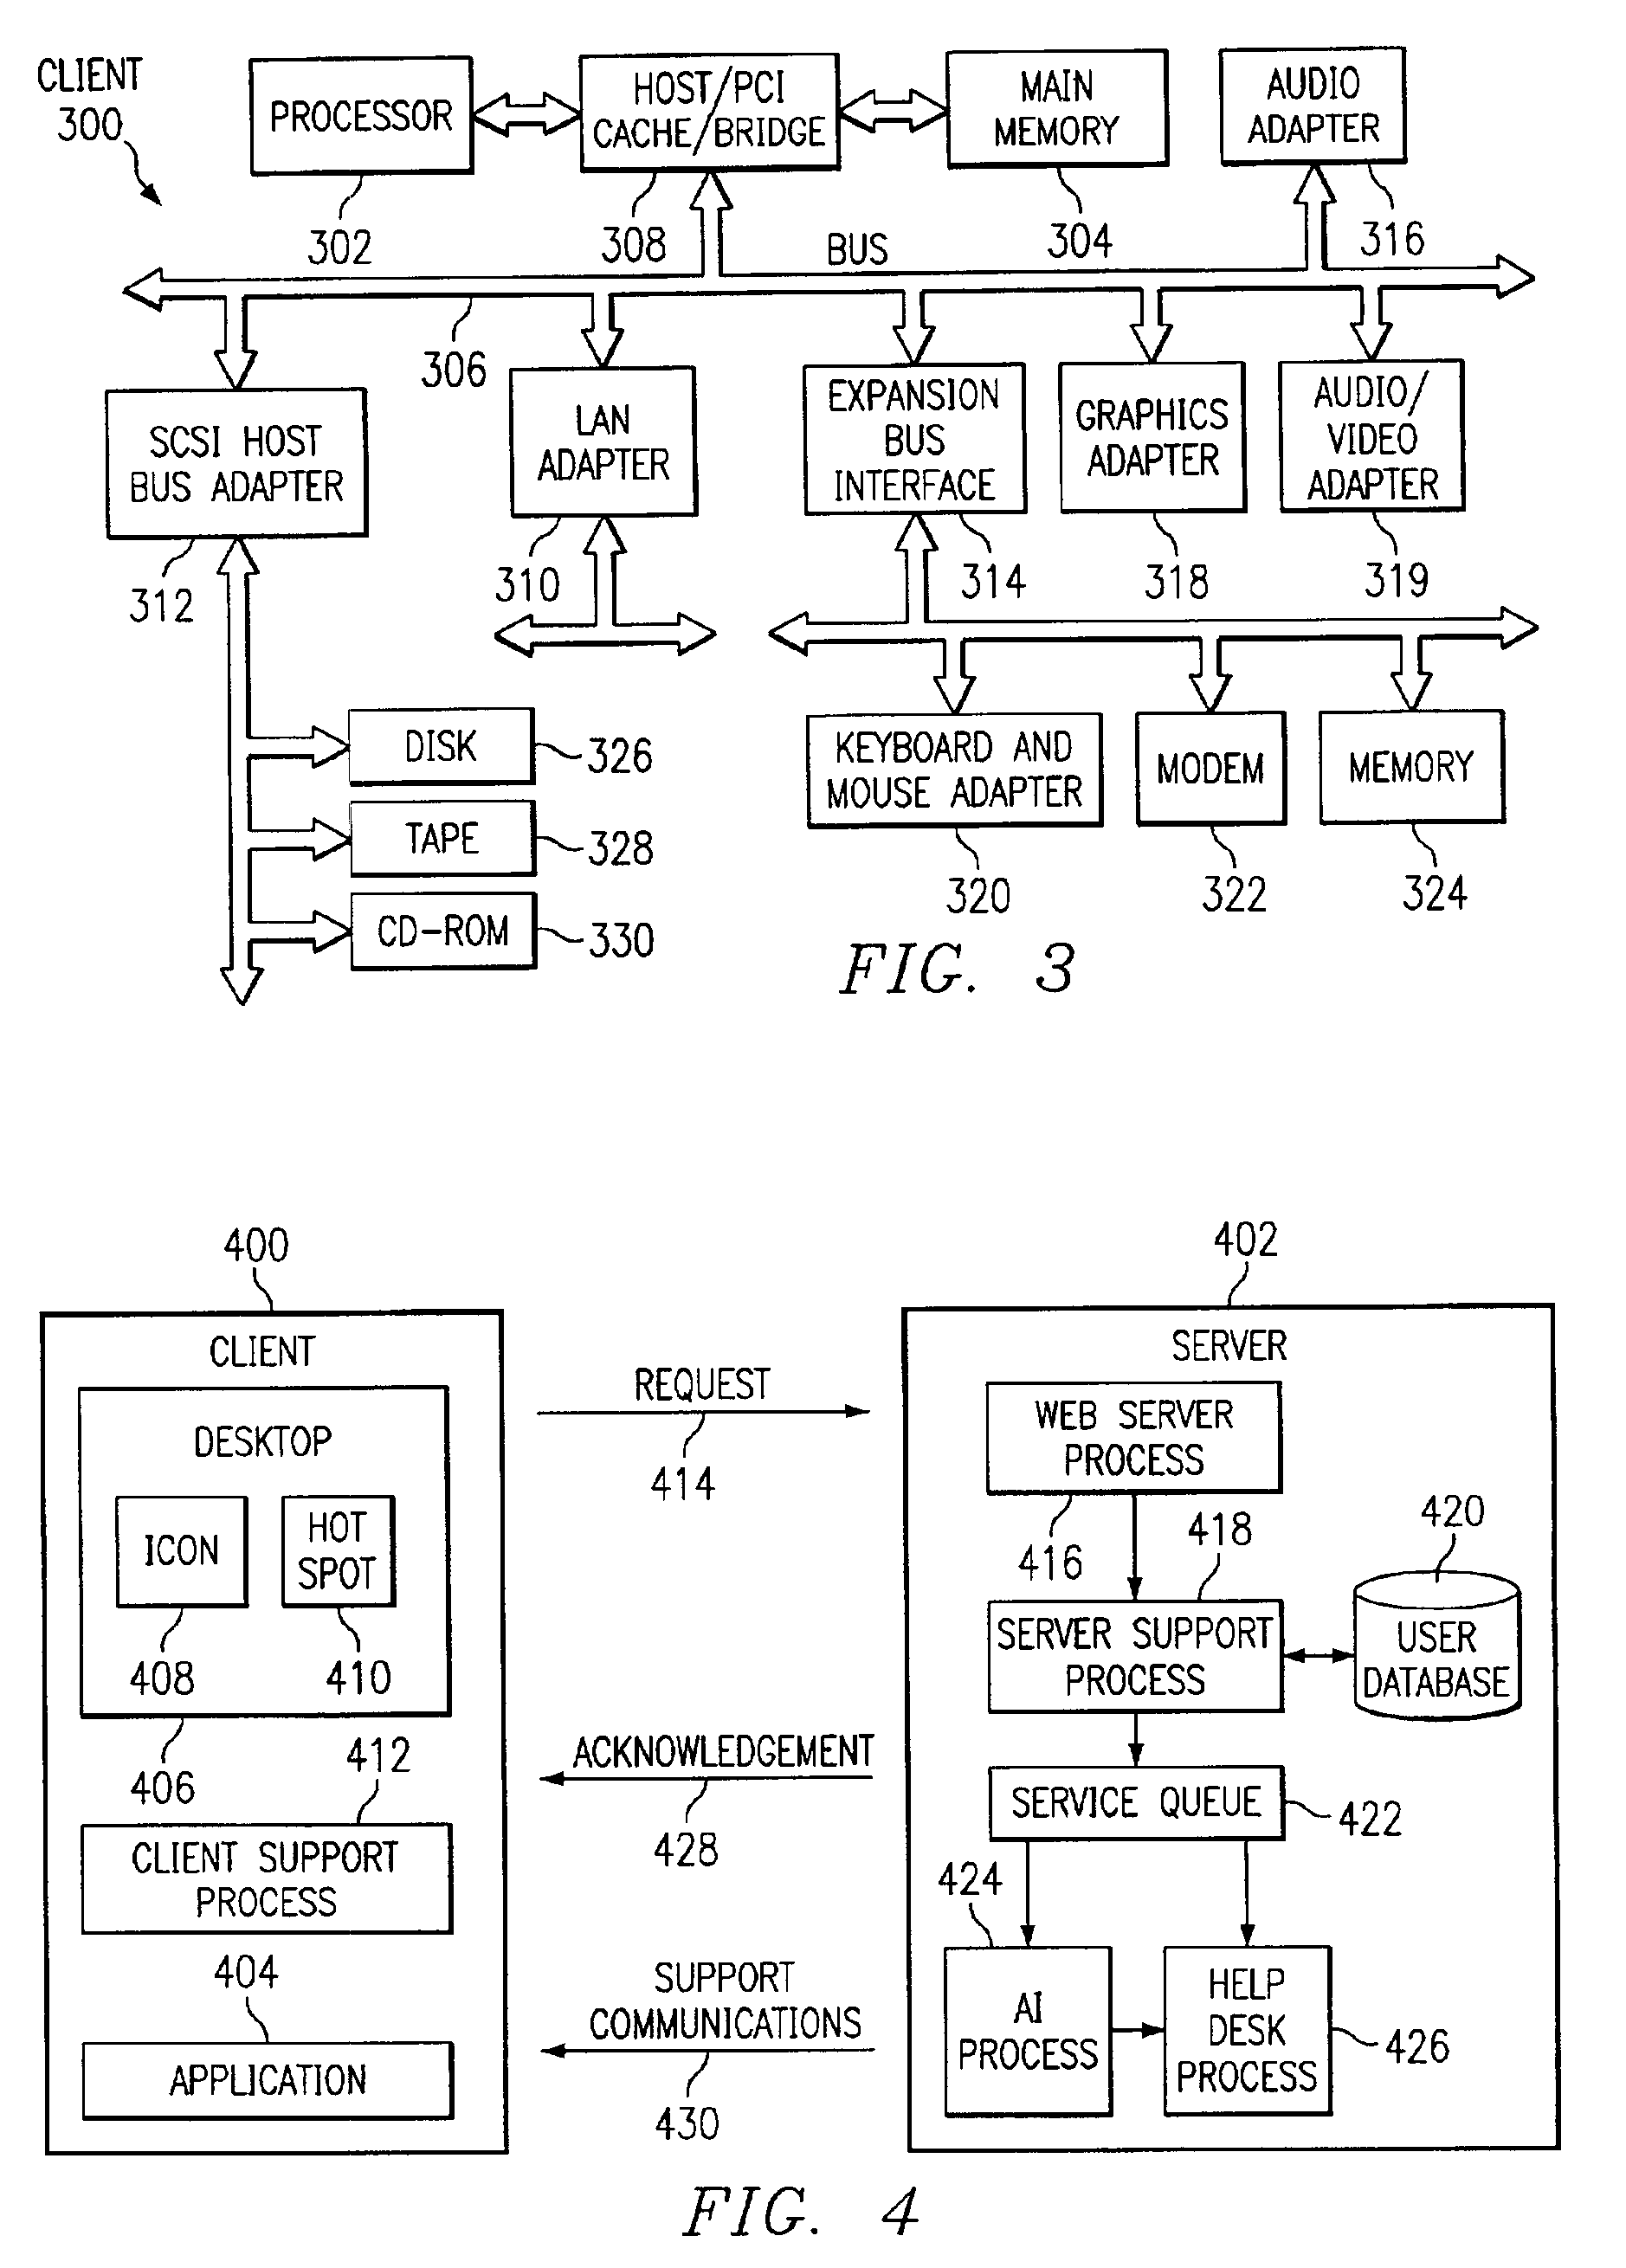 Method and apparatus for providing user support through an intelligent help agent